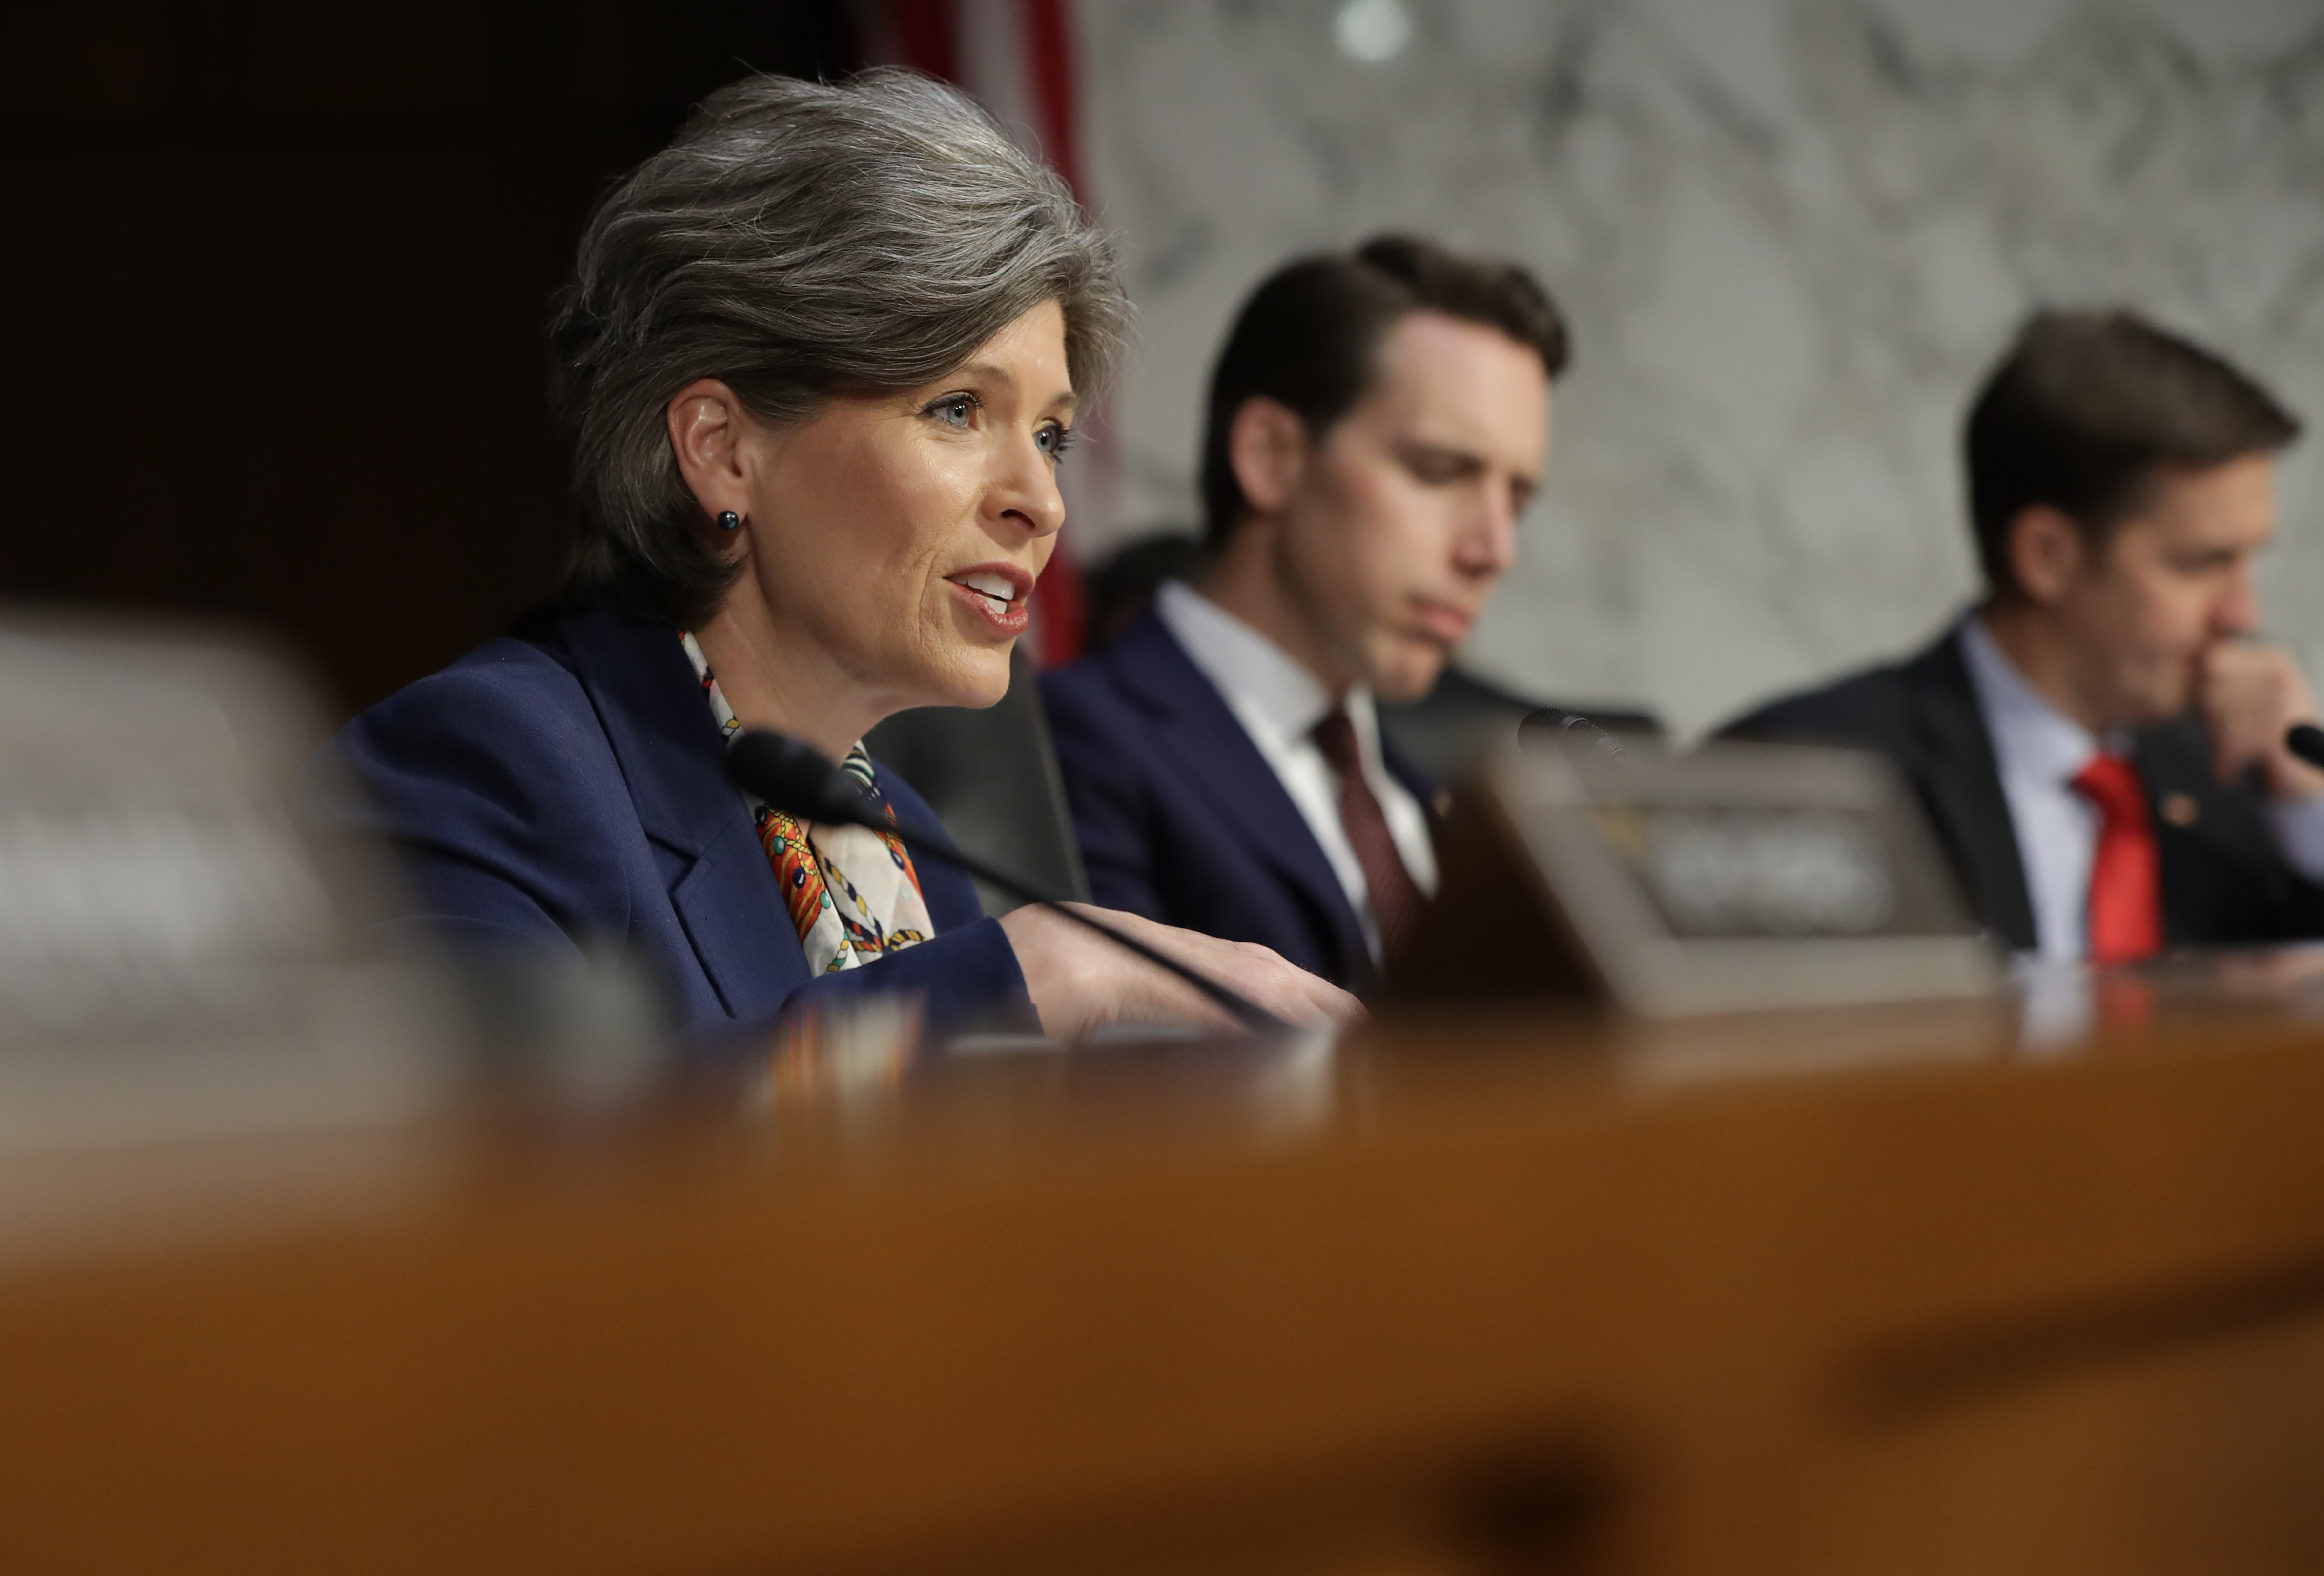 Sen. Joni Ernst (R-IA) questions Attorney General nominee William Barr during his confirmation hearing on January 15, 2019. (Chip Somodevilla/Getty Images)